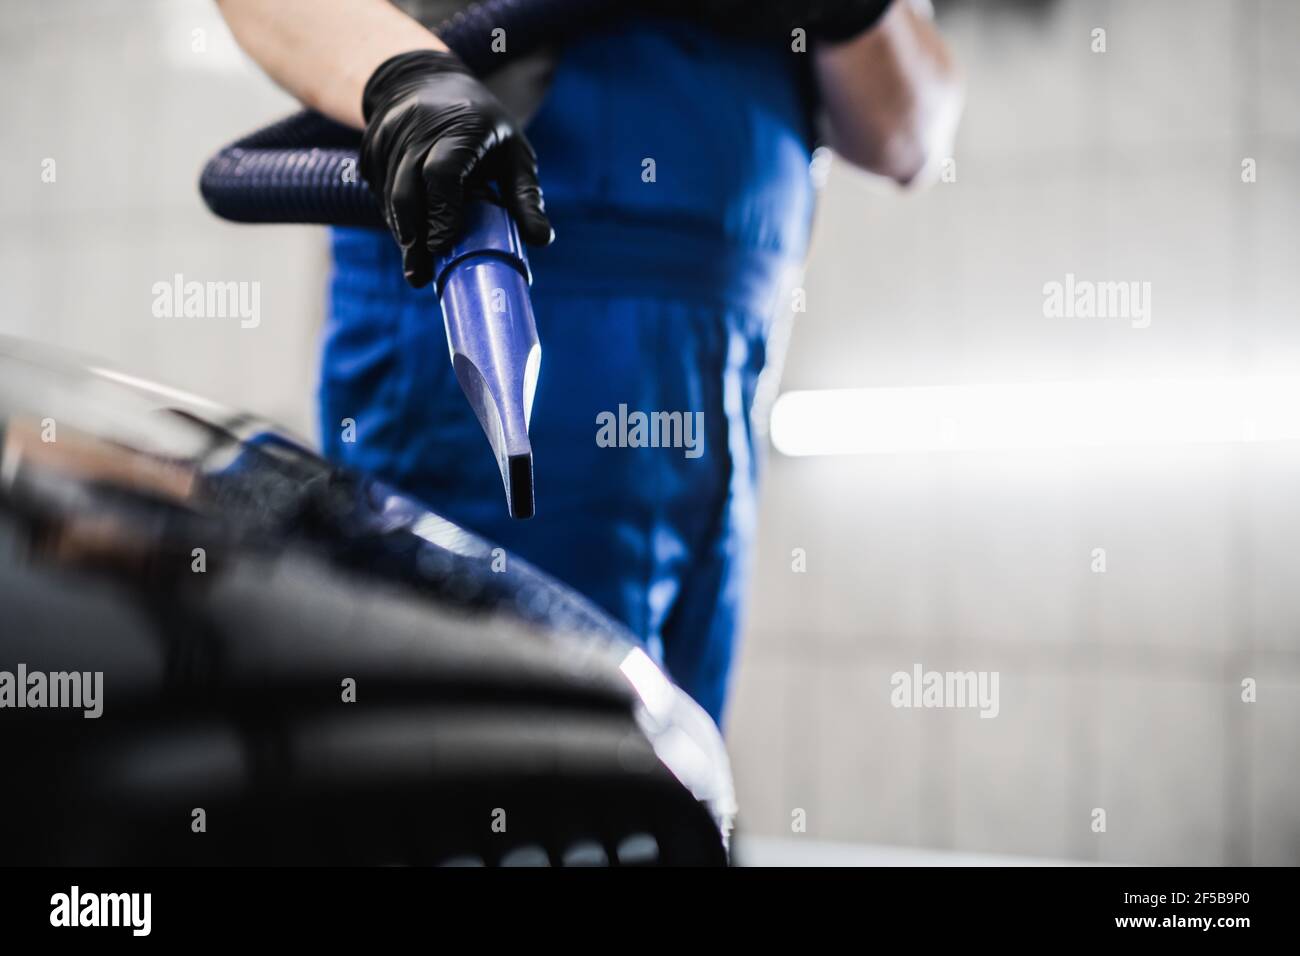 https://c8.alamy.com/comp/2F5B9P0/man-blowing-off-water-from-freshly-washed-black-car-with-air-car-wash-and-detailing-service-2F5B9P0.jpg